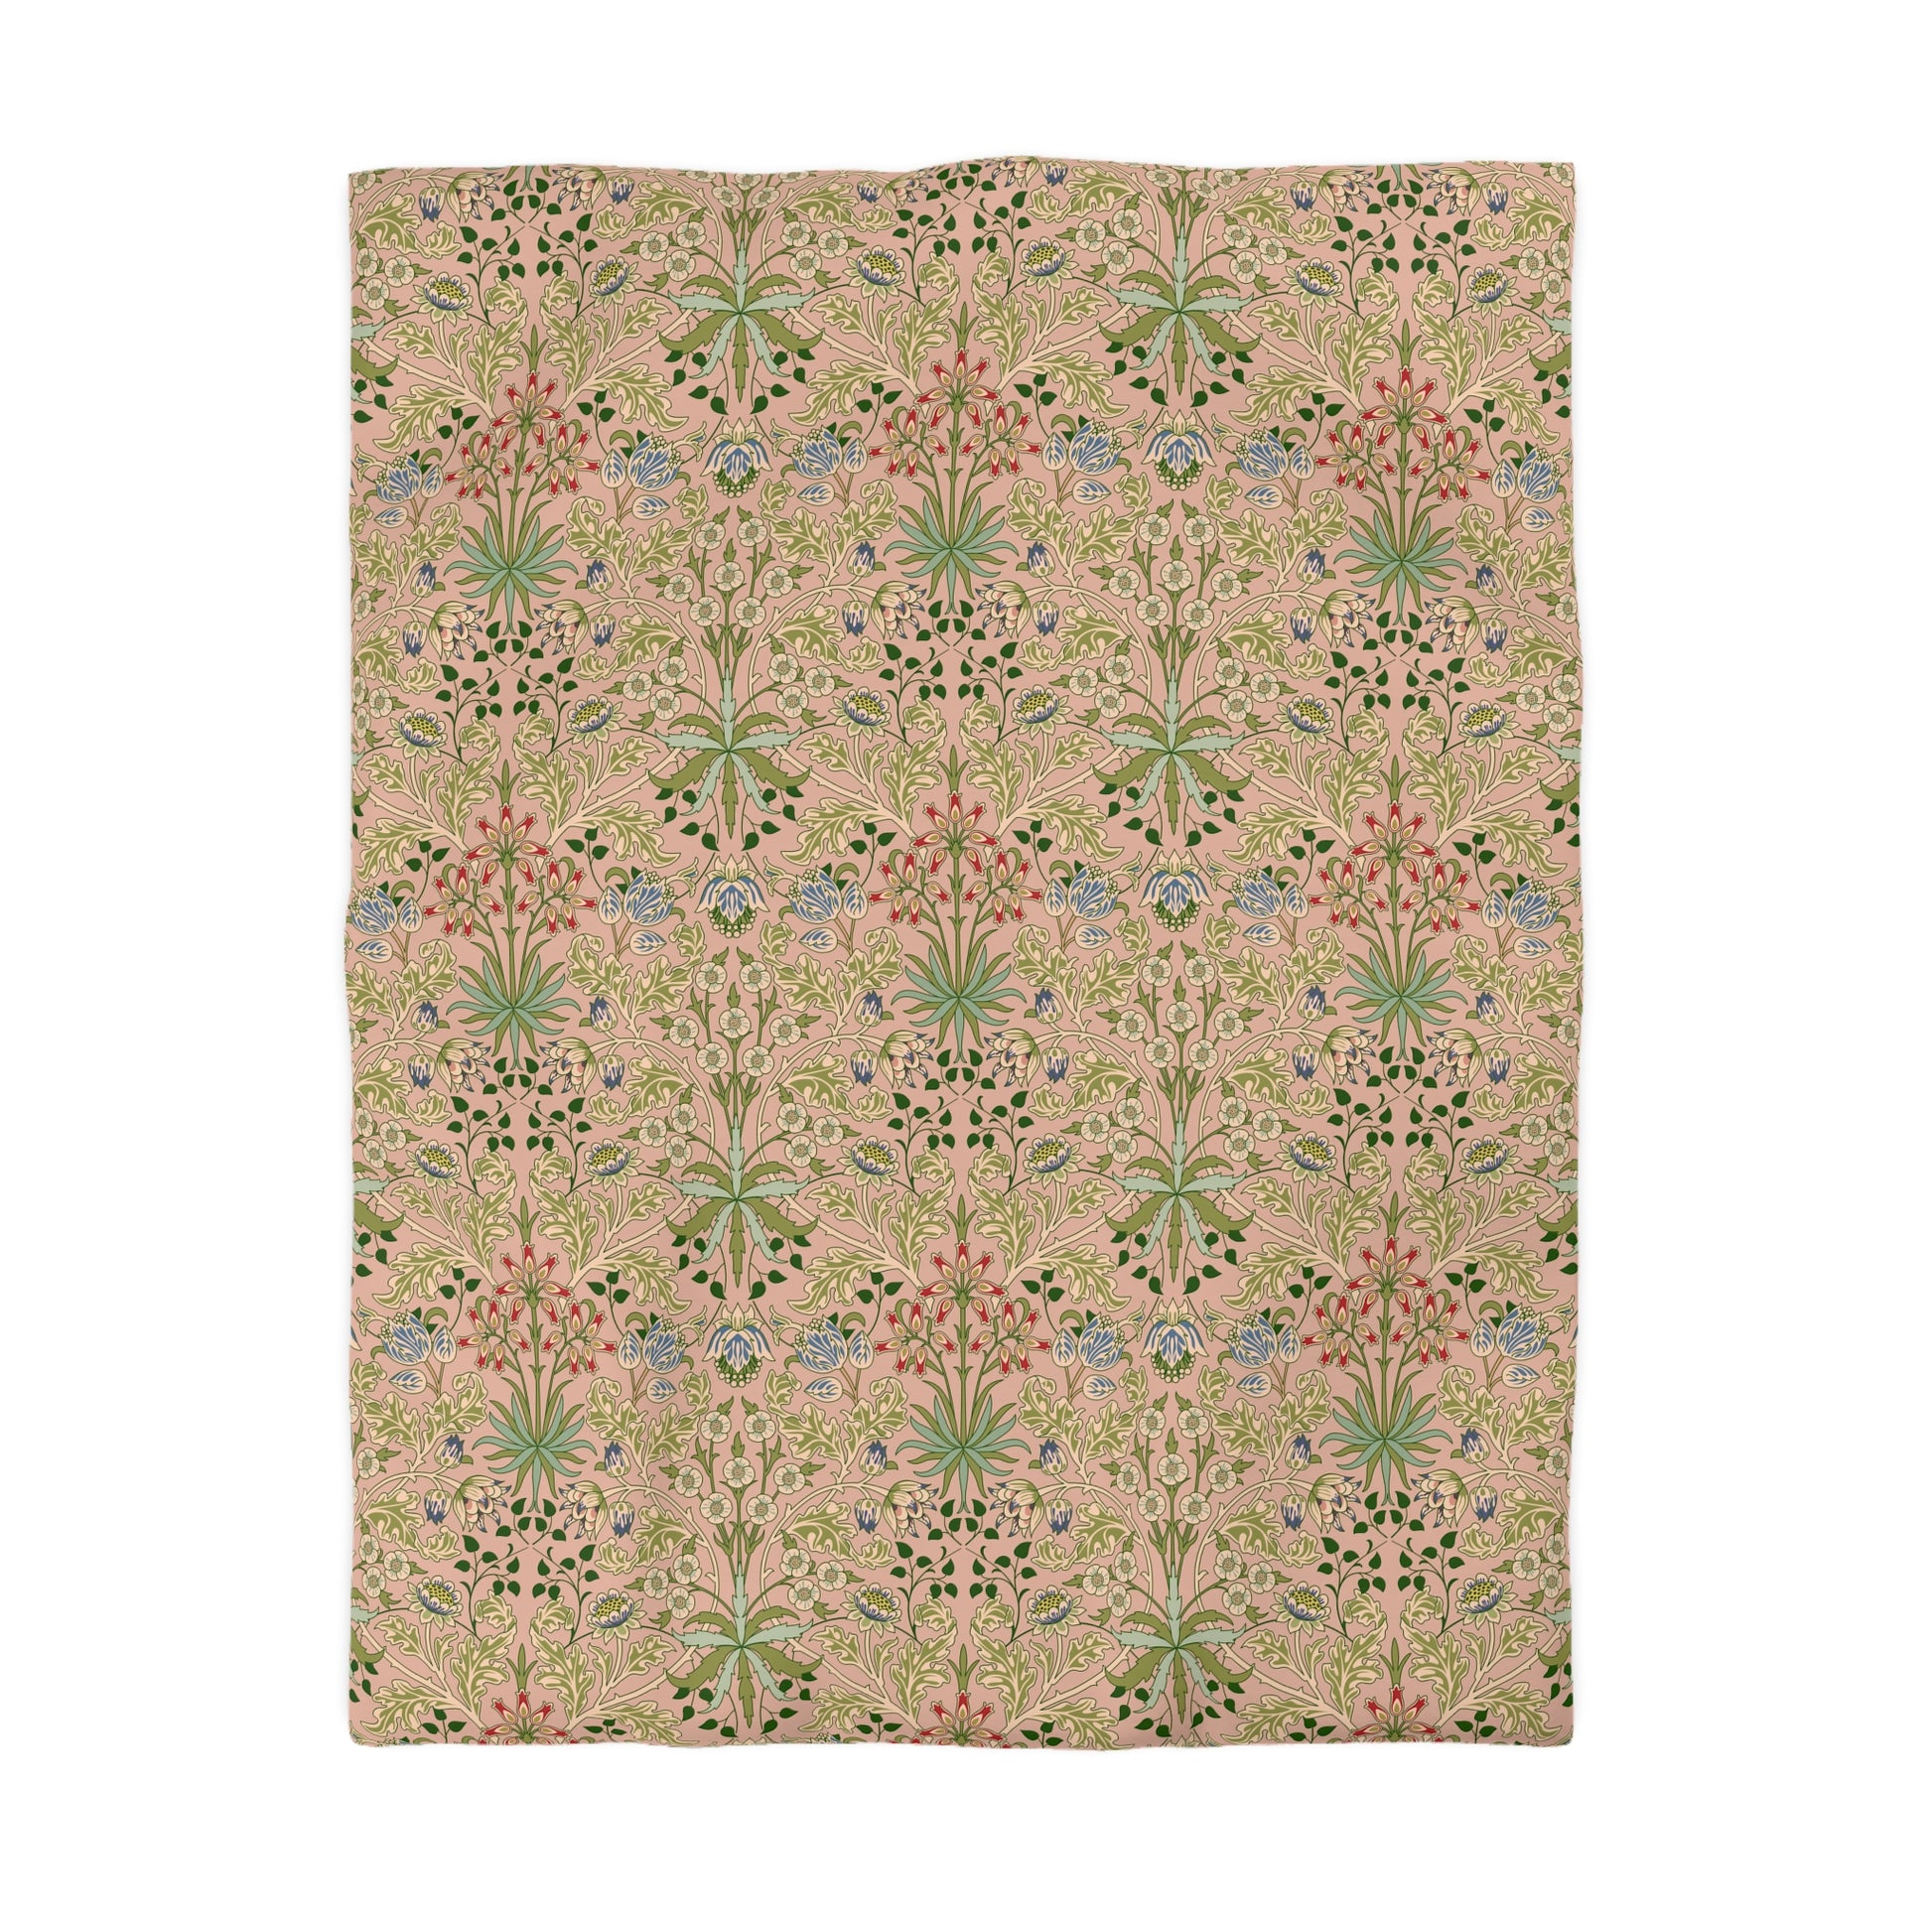 william-morris-co-duvet-cover-hyacinth-collection-blossom-12